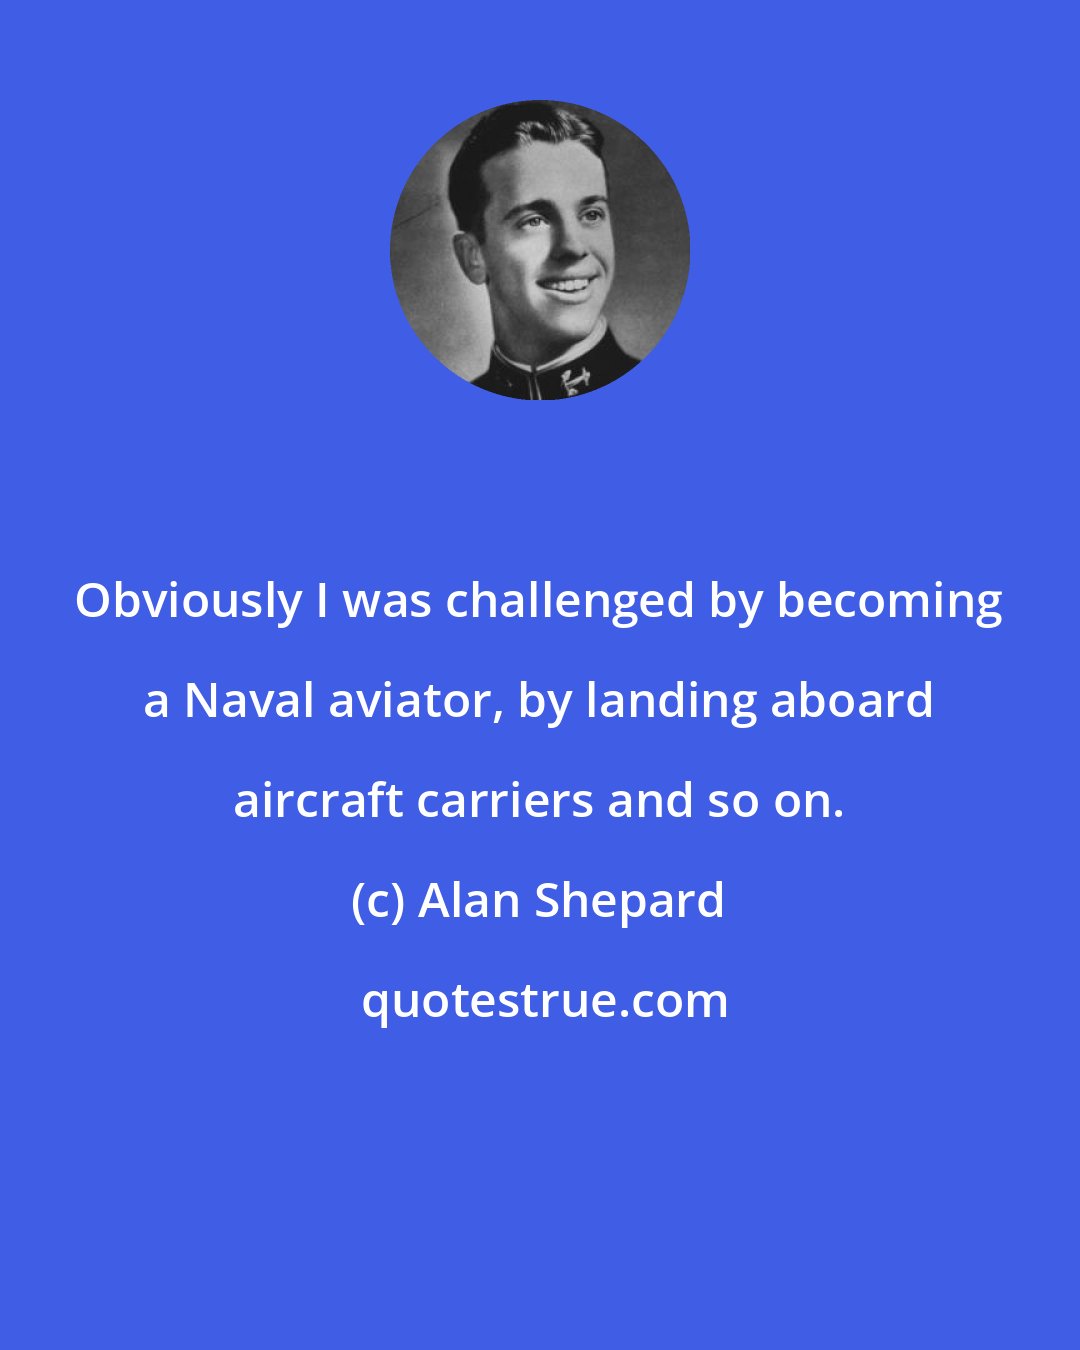 Alan Shepard: Obviously I was challenged by becoming a Naval aviator, by landing aboard aircraft carriers and so on.